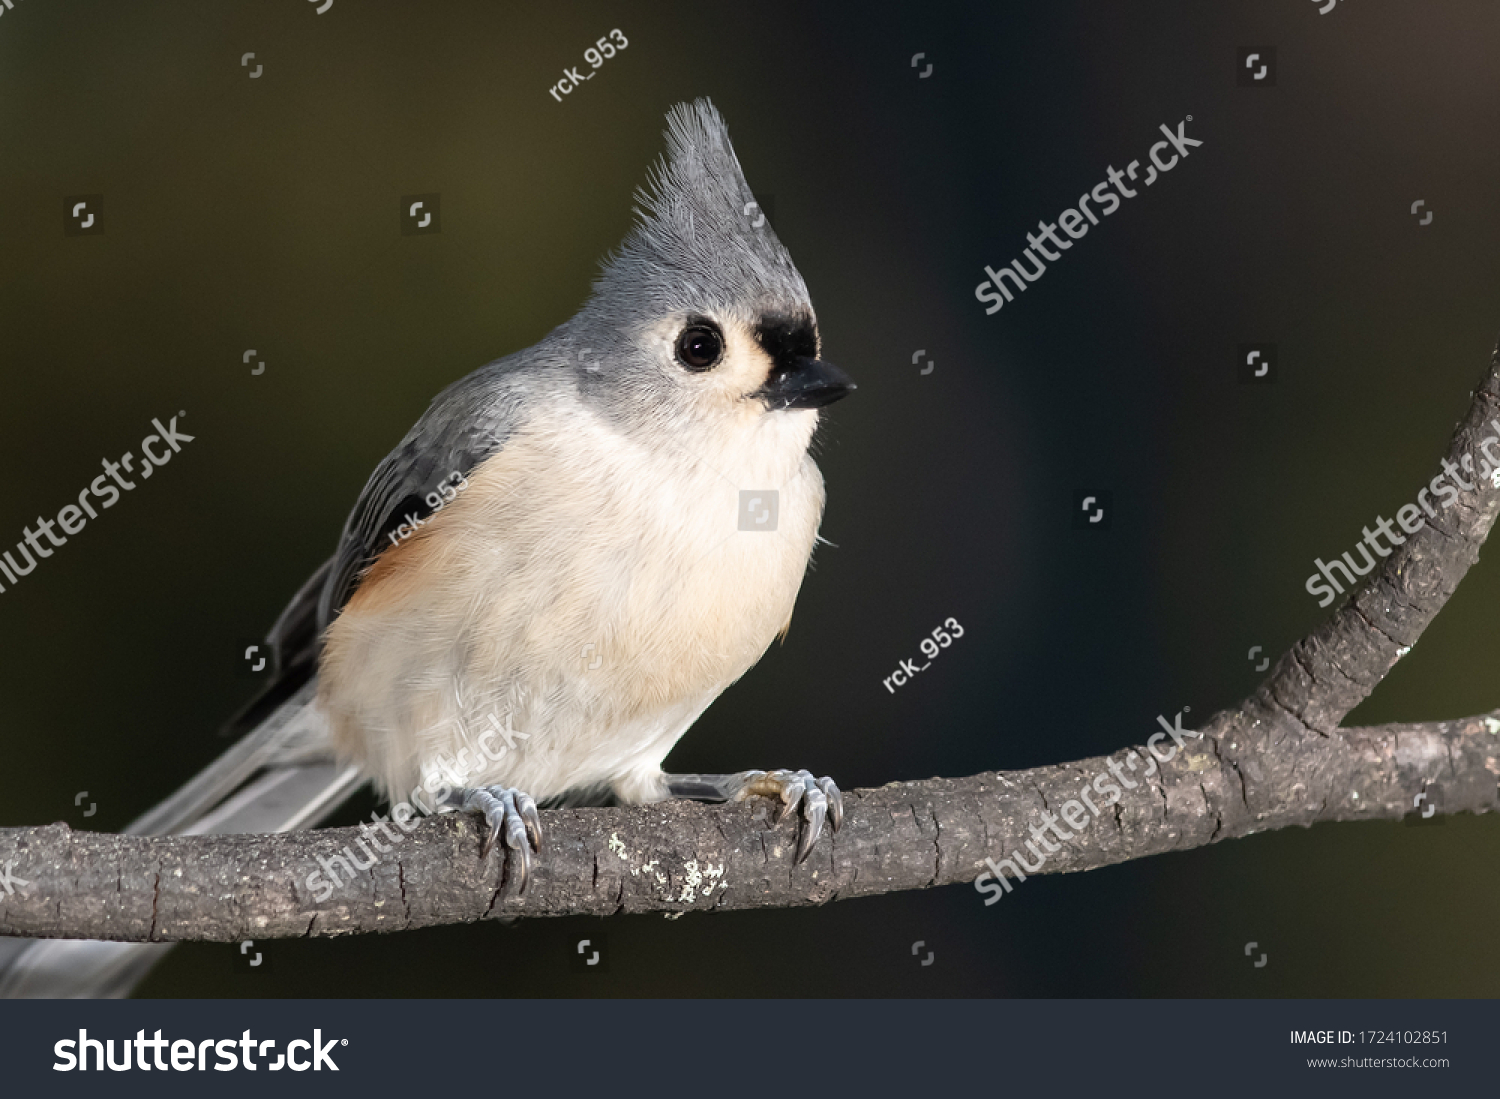 Tufted Titmouse Perched Delicately on a Slender Branch #1724102851